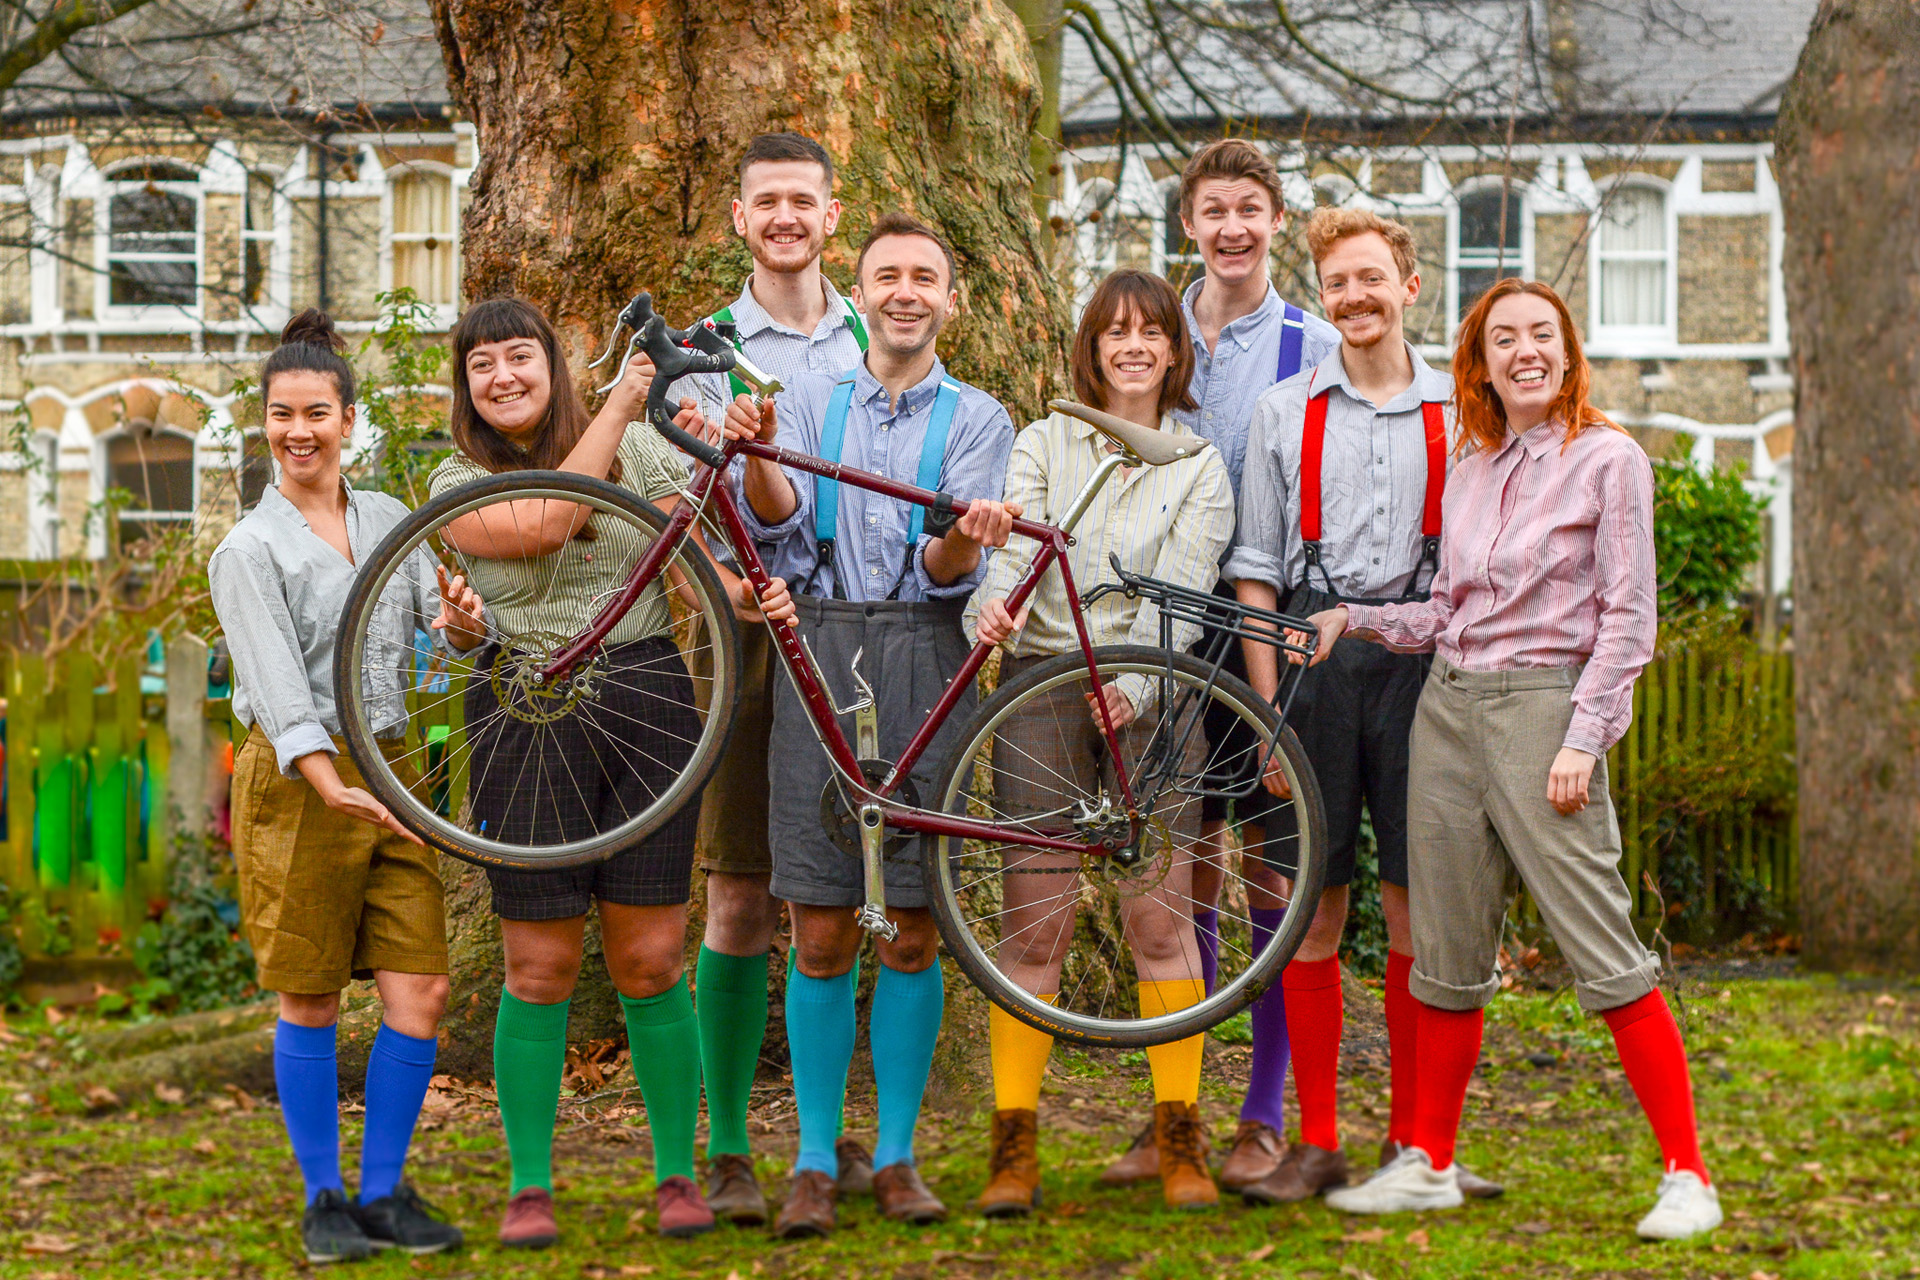 Group shot of the travelling Handlebards troupe